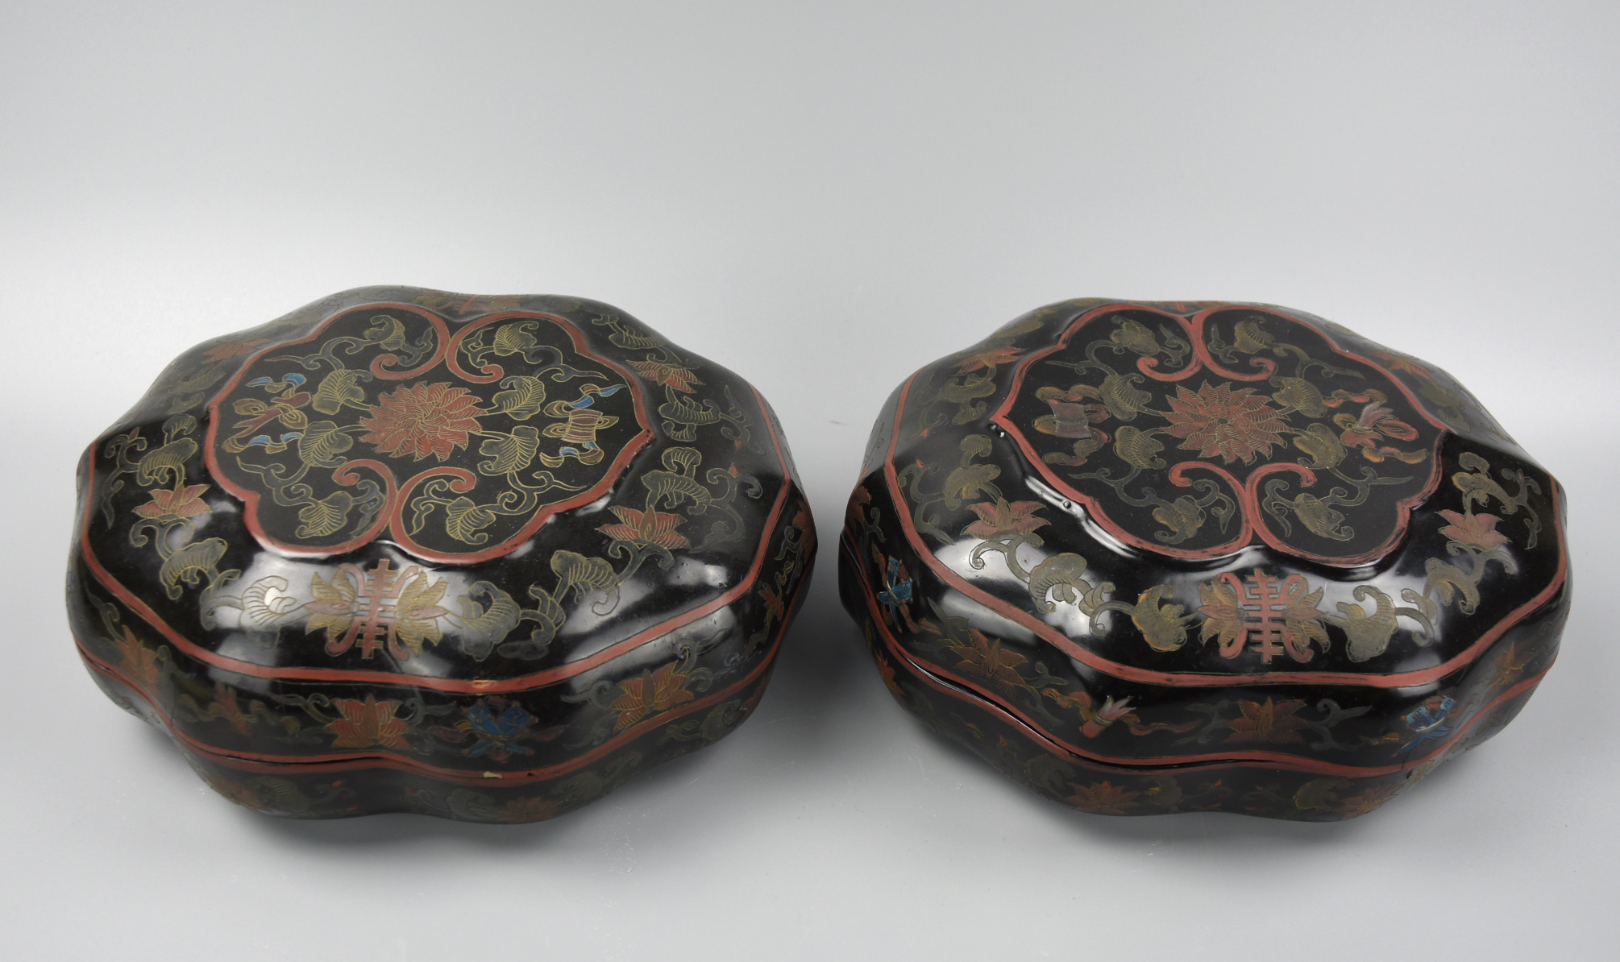 PAIR OF LACQUERWARE BOXES COVER 20TH 33992d